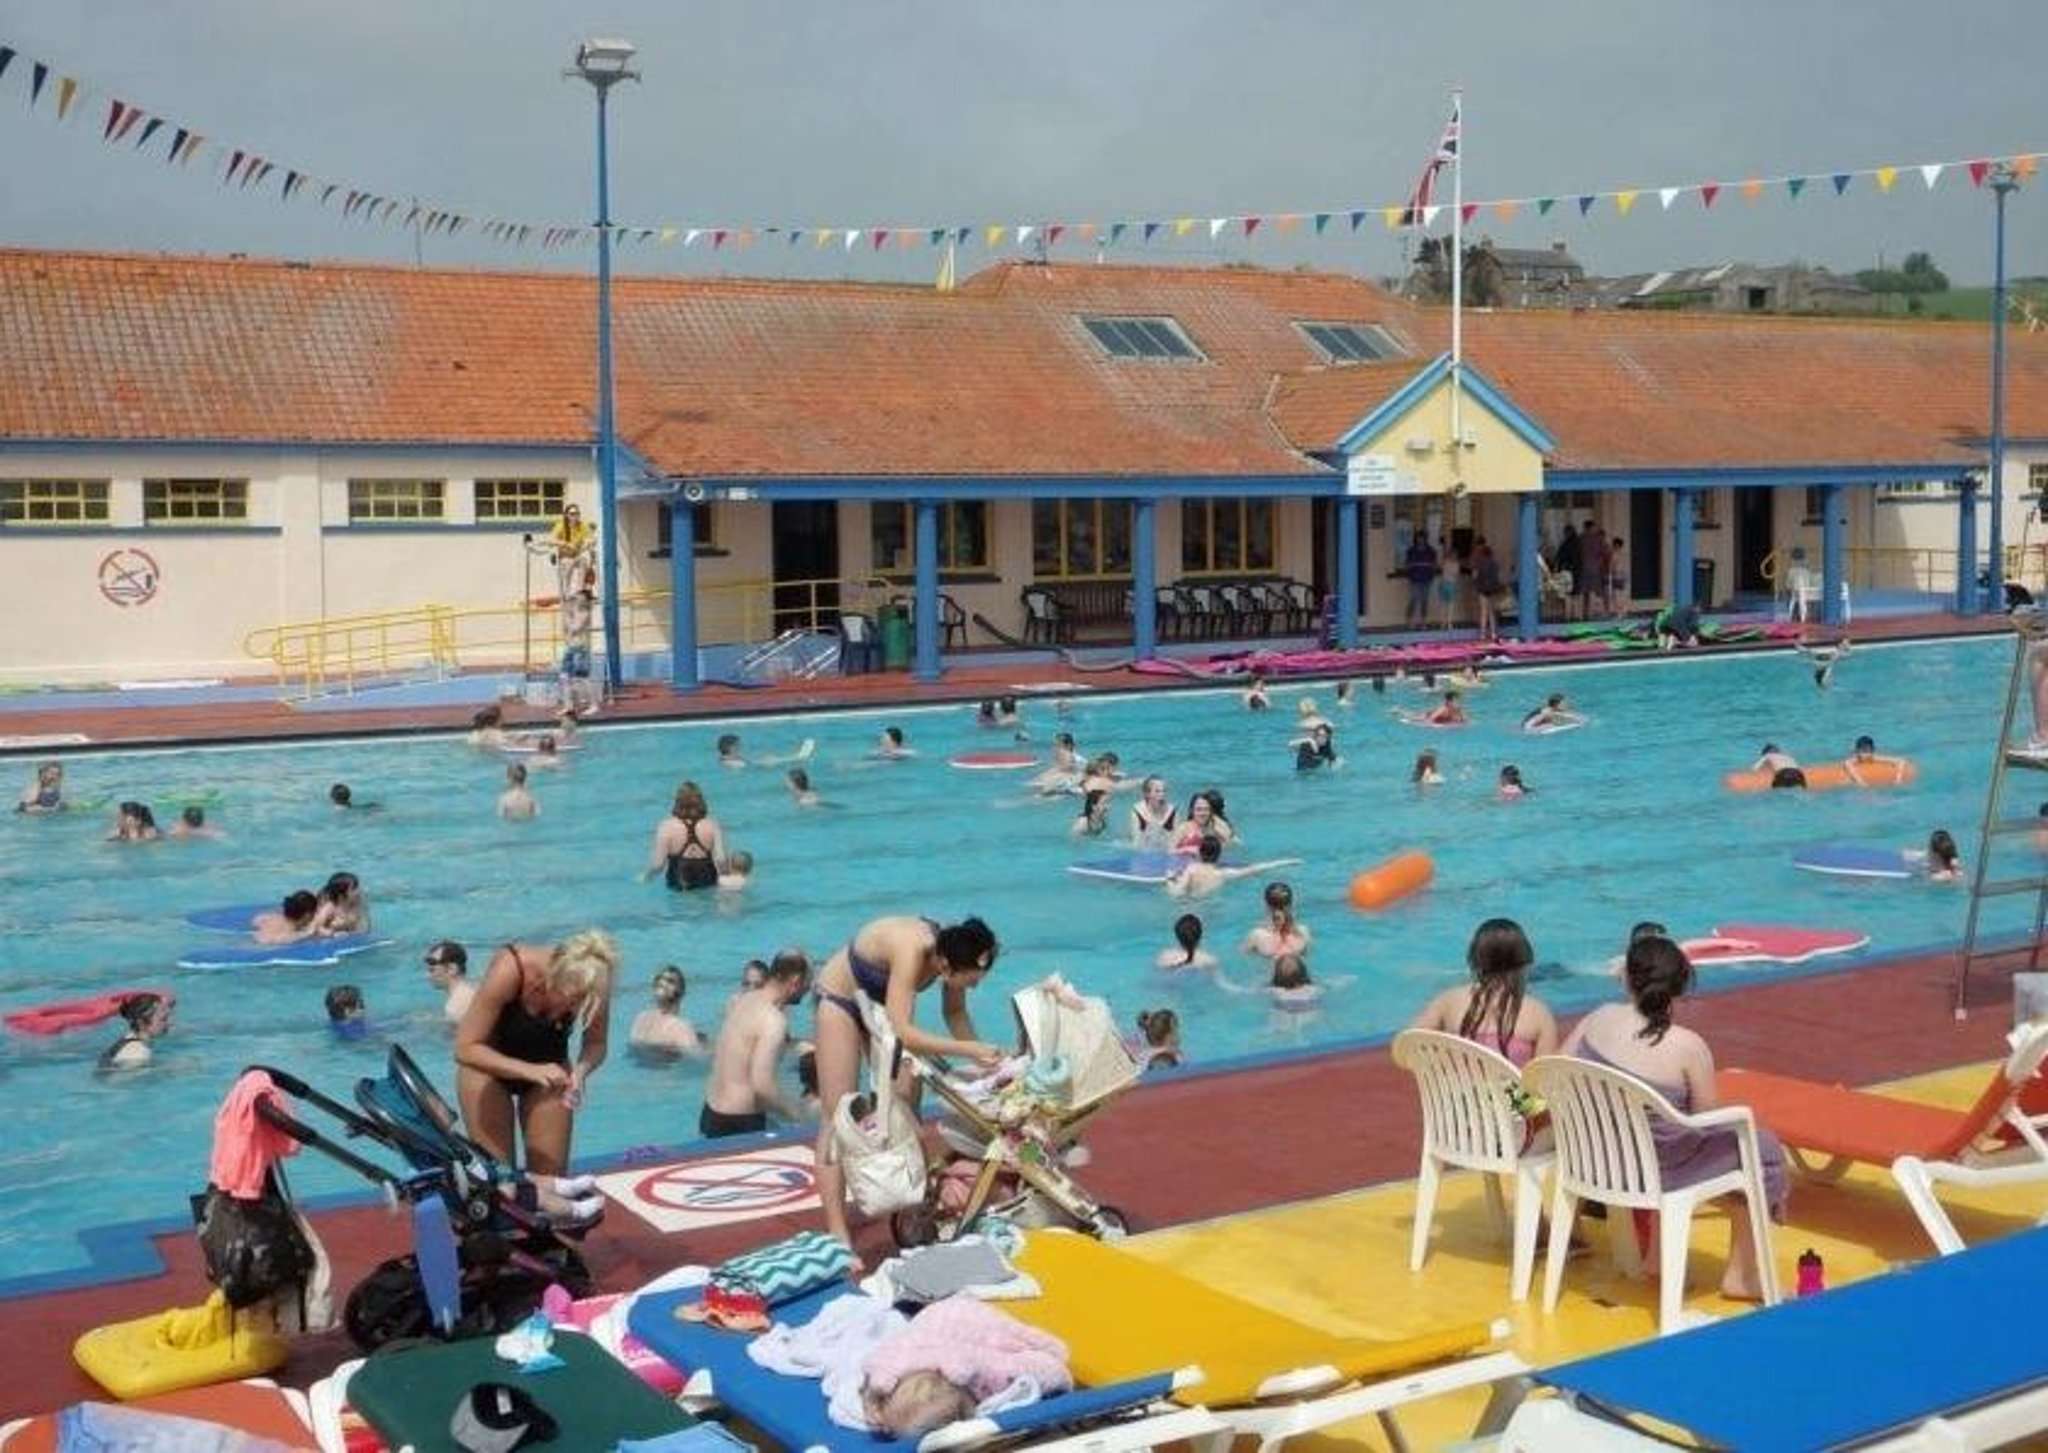 Stonehaven Open Air Pool will make a splash in 2021 ...